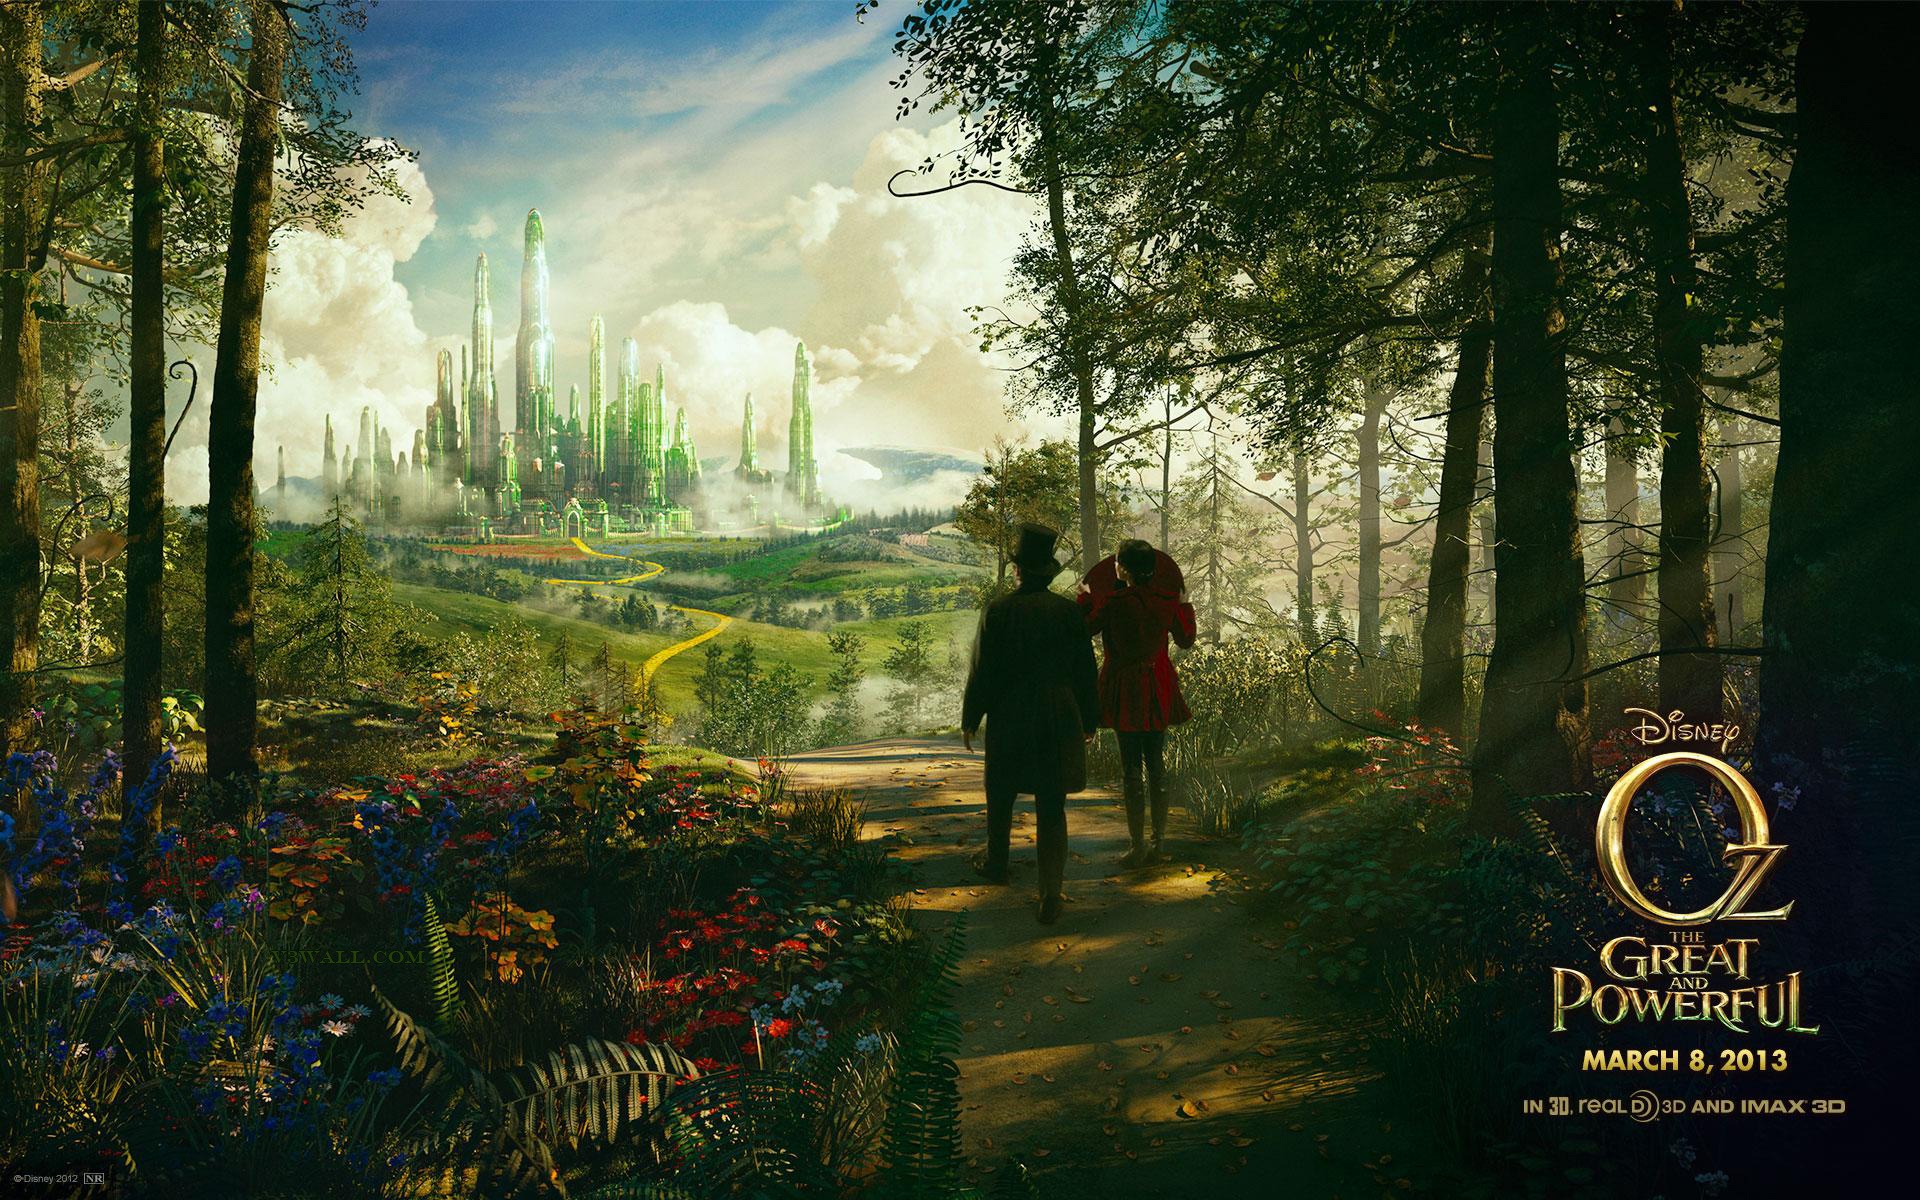 Oz The Great and Powerful 绿野仙踪 高清壁纸11 - 1920x1200